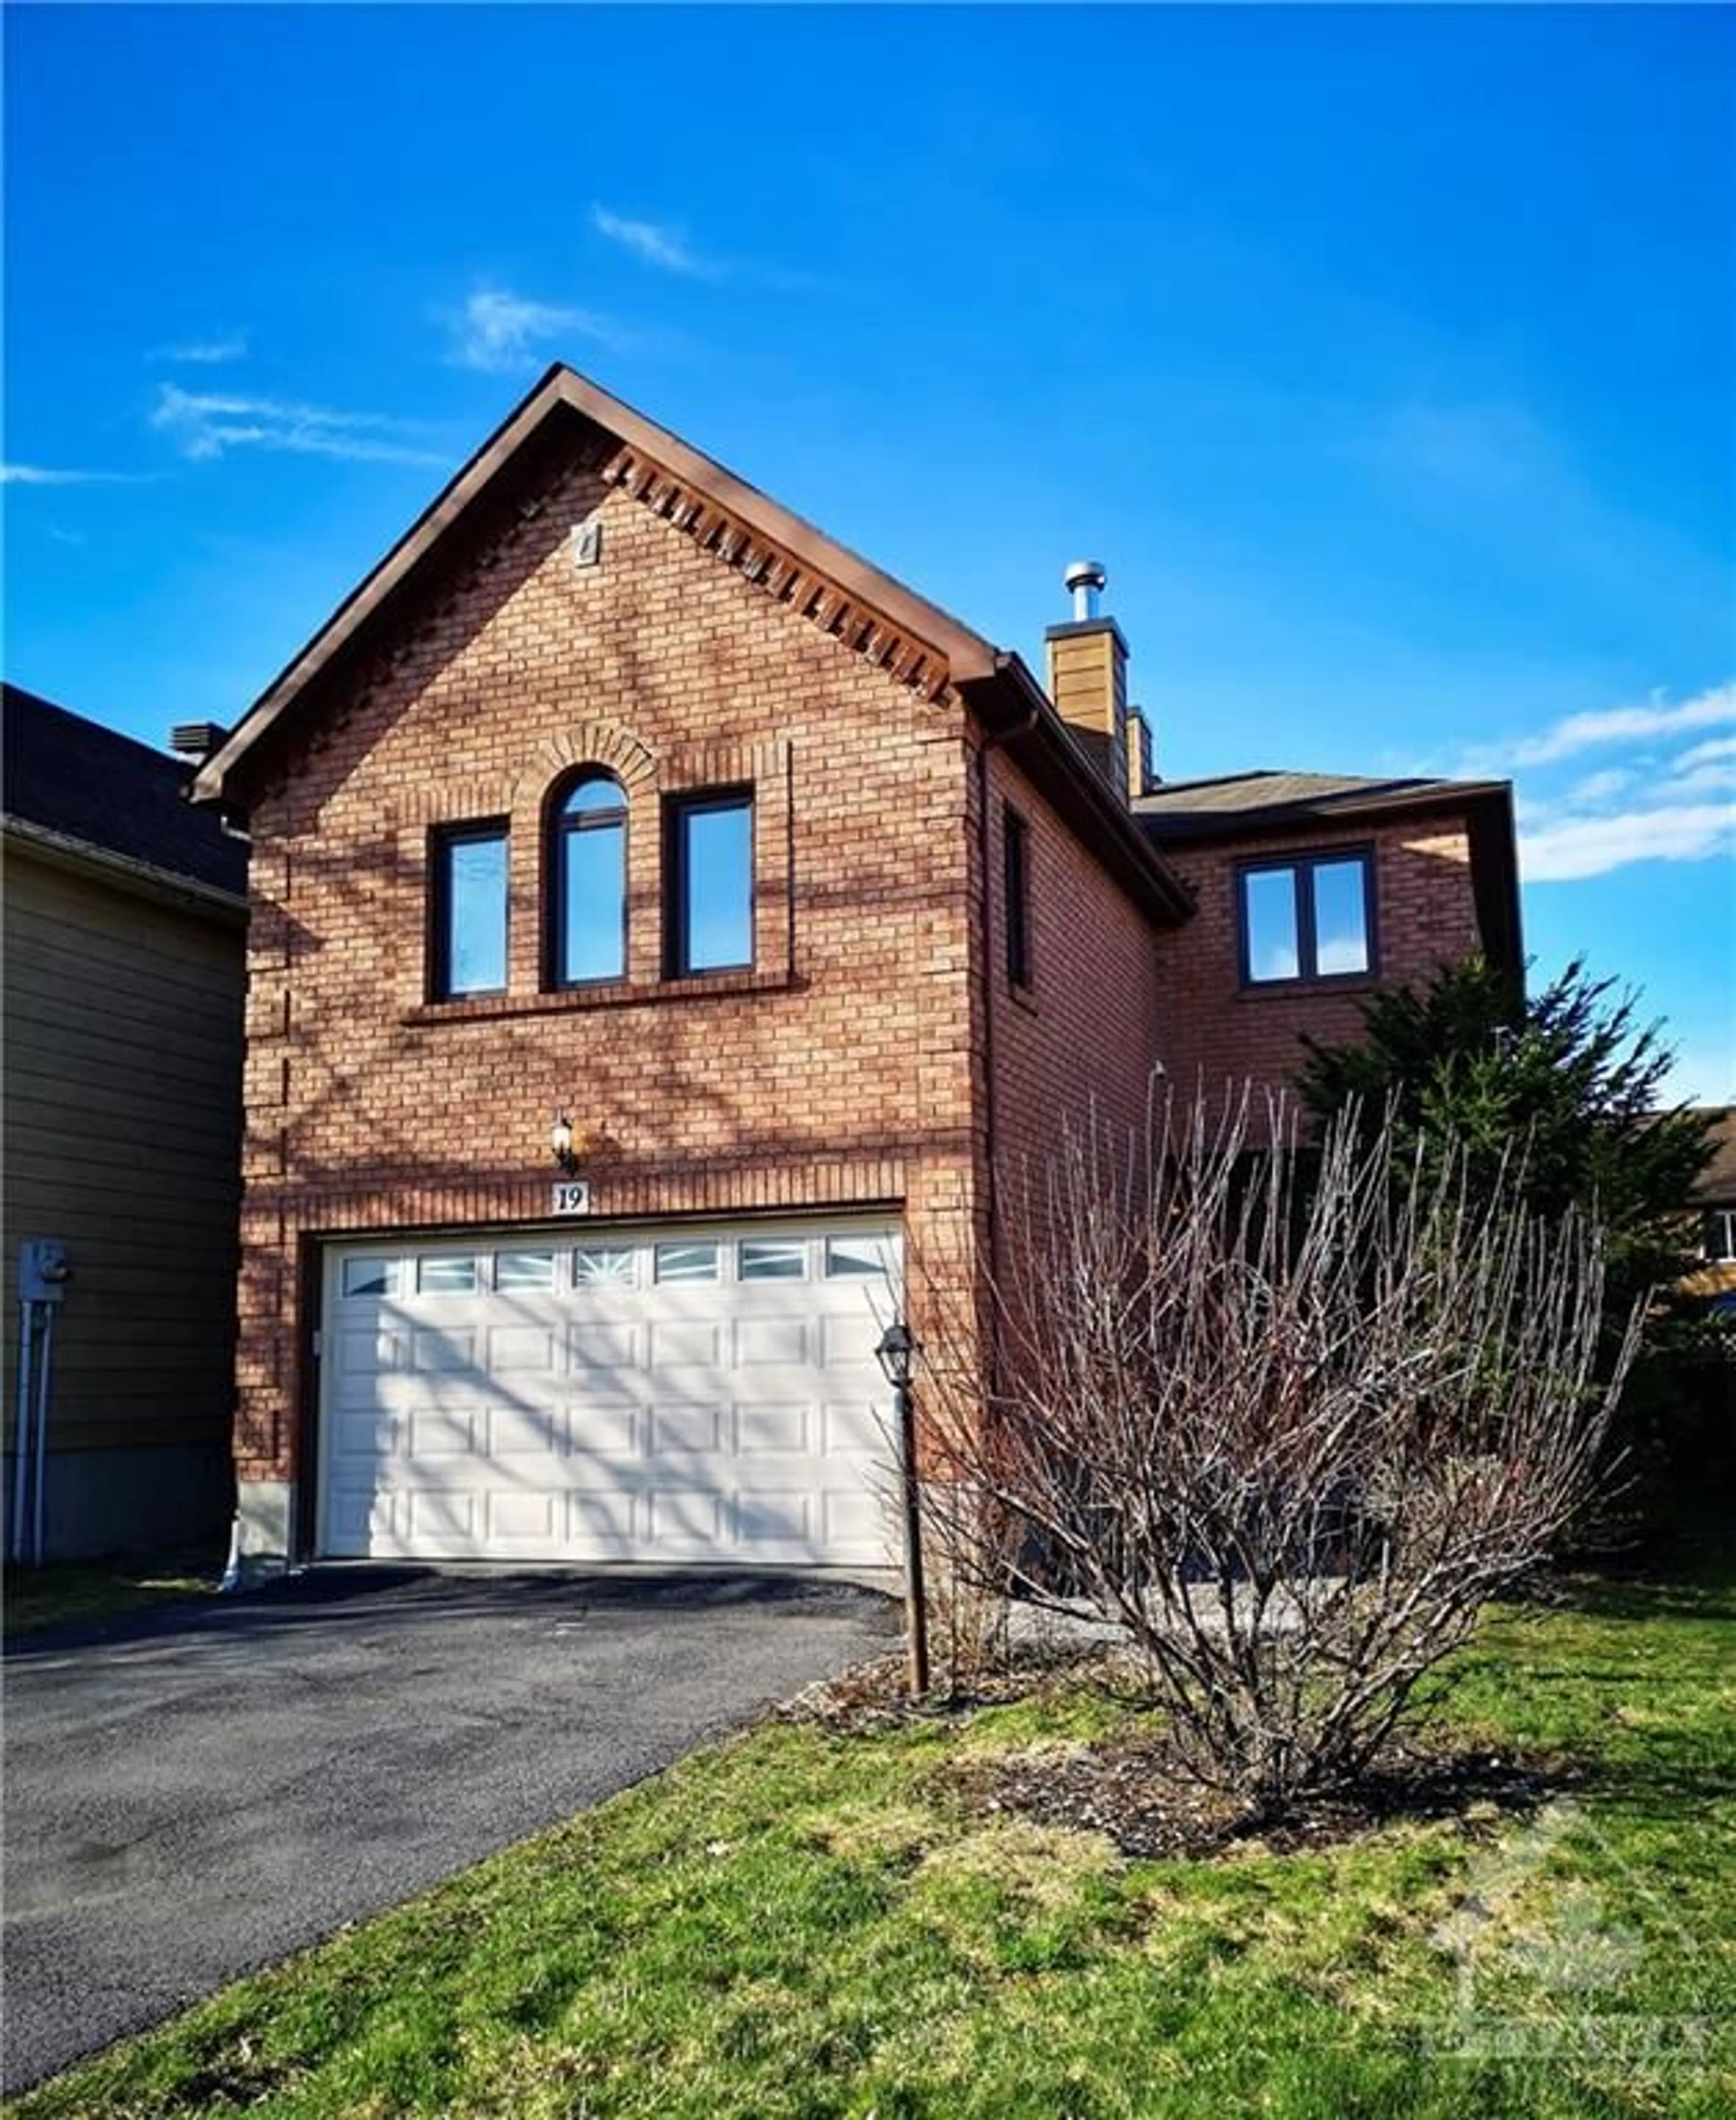 Home with brick exterior material for 19 INWOOD Dr, Kanata Ontario K2M 1Z6